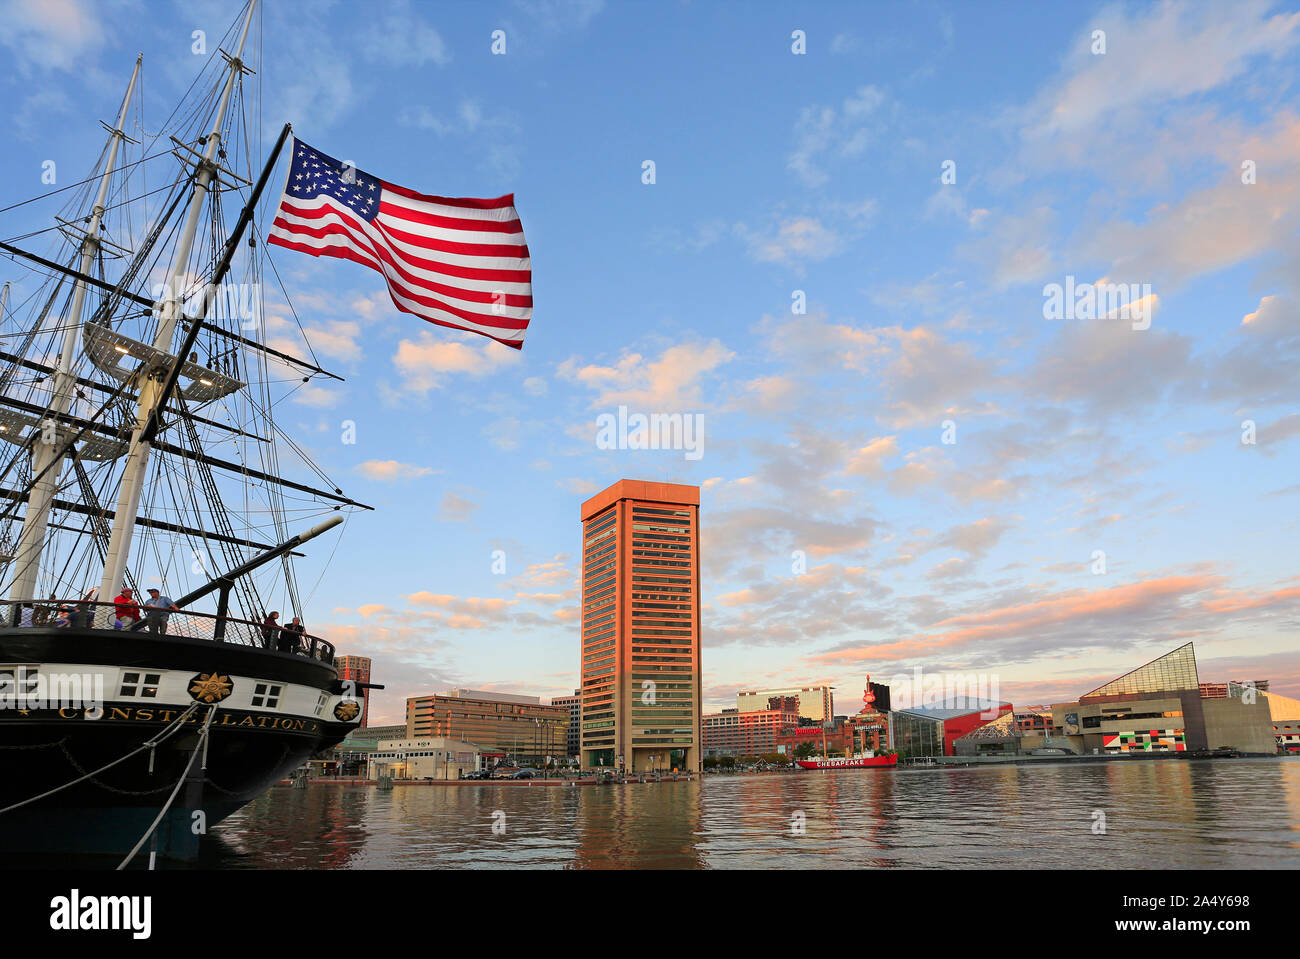 Waterfront view of Baltimore Inner Harbor marina and the city skyline with USS Constelation historic boat on the foreground Stock Photo